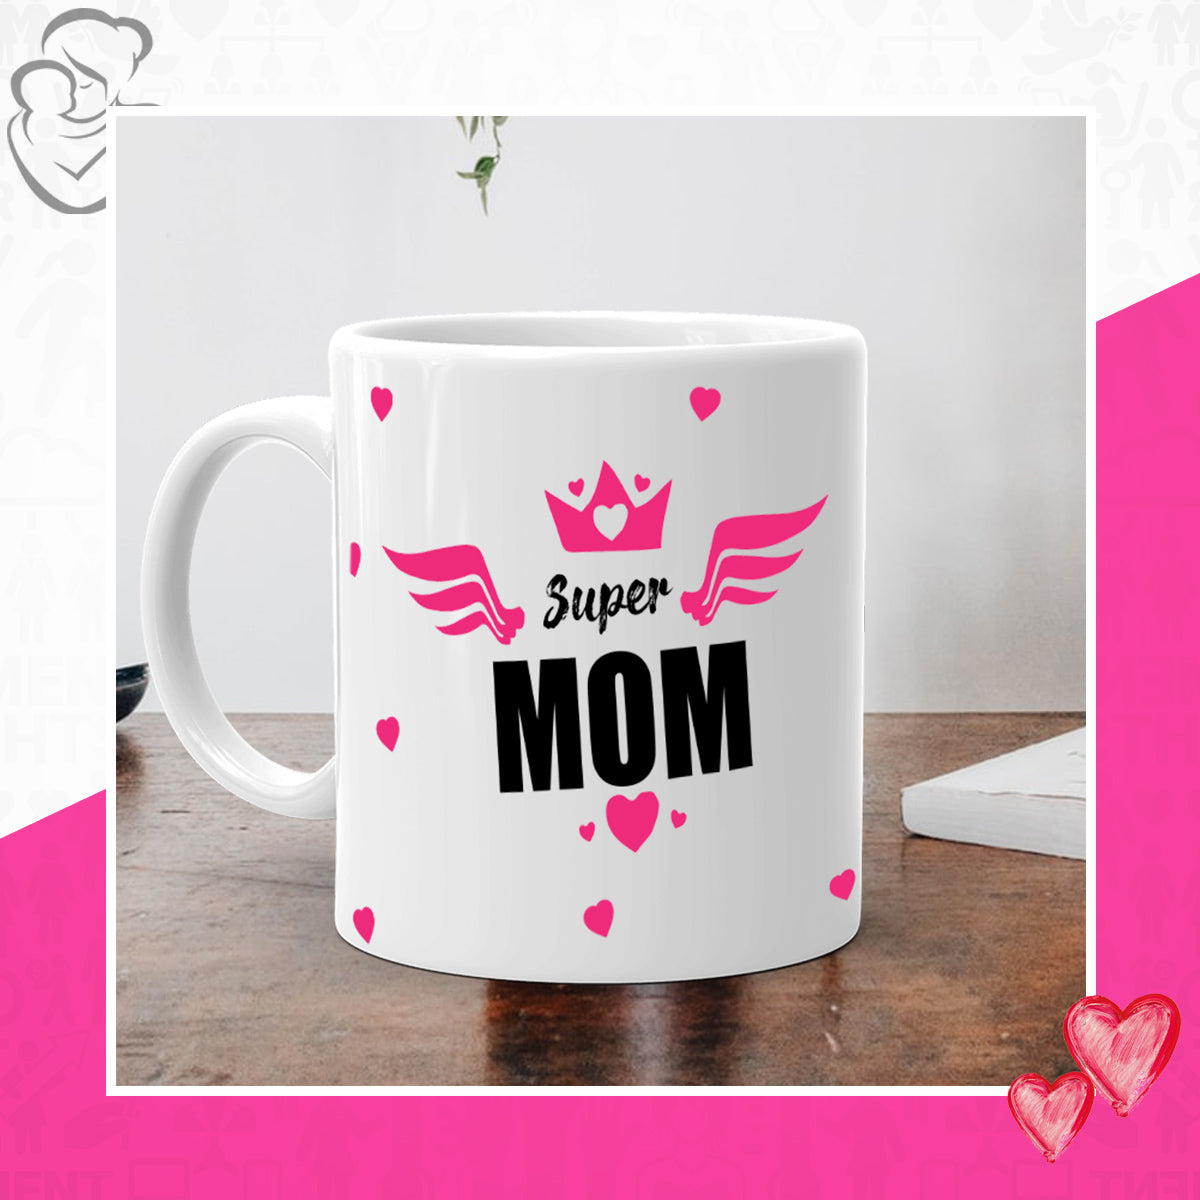 Delightful gifting on Mothers Day - IGP Blog - Gift Ideas for Women's Day,  Birthday, Wedding & Anniversary, Personalized Gifts n More...